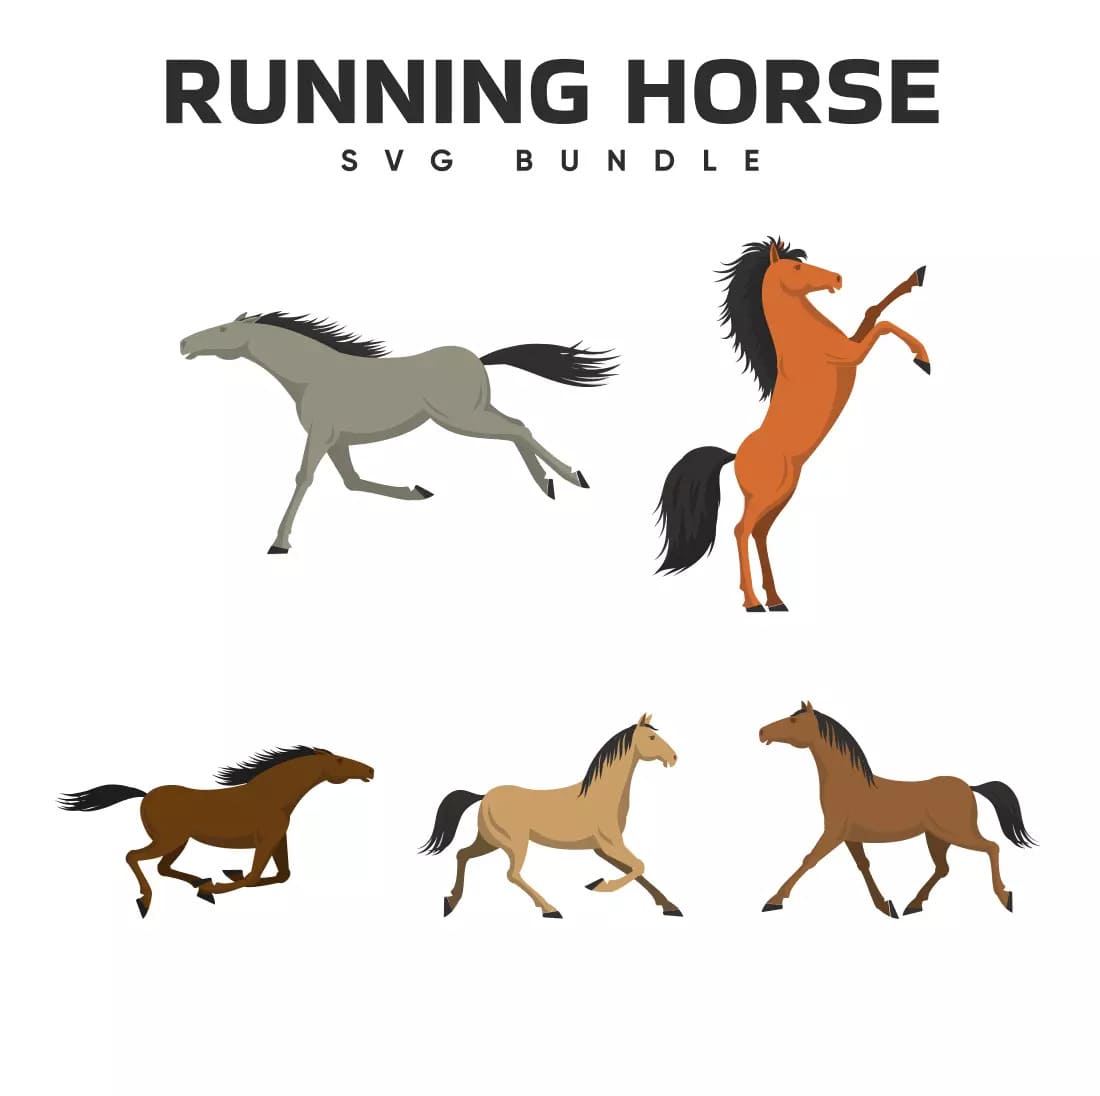 Group of horses running across a white background.